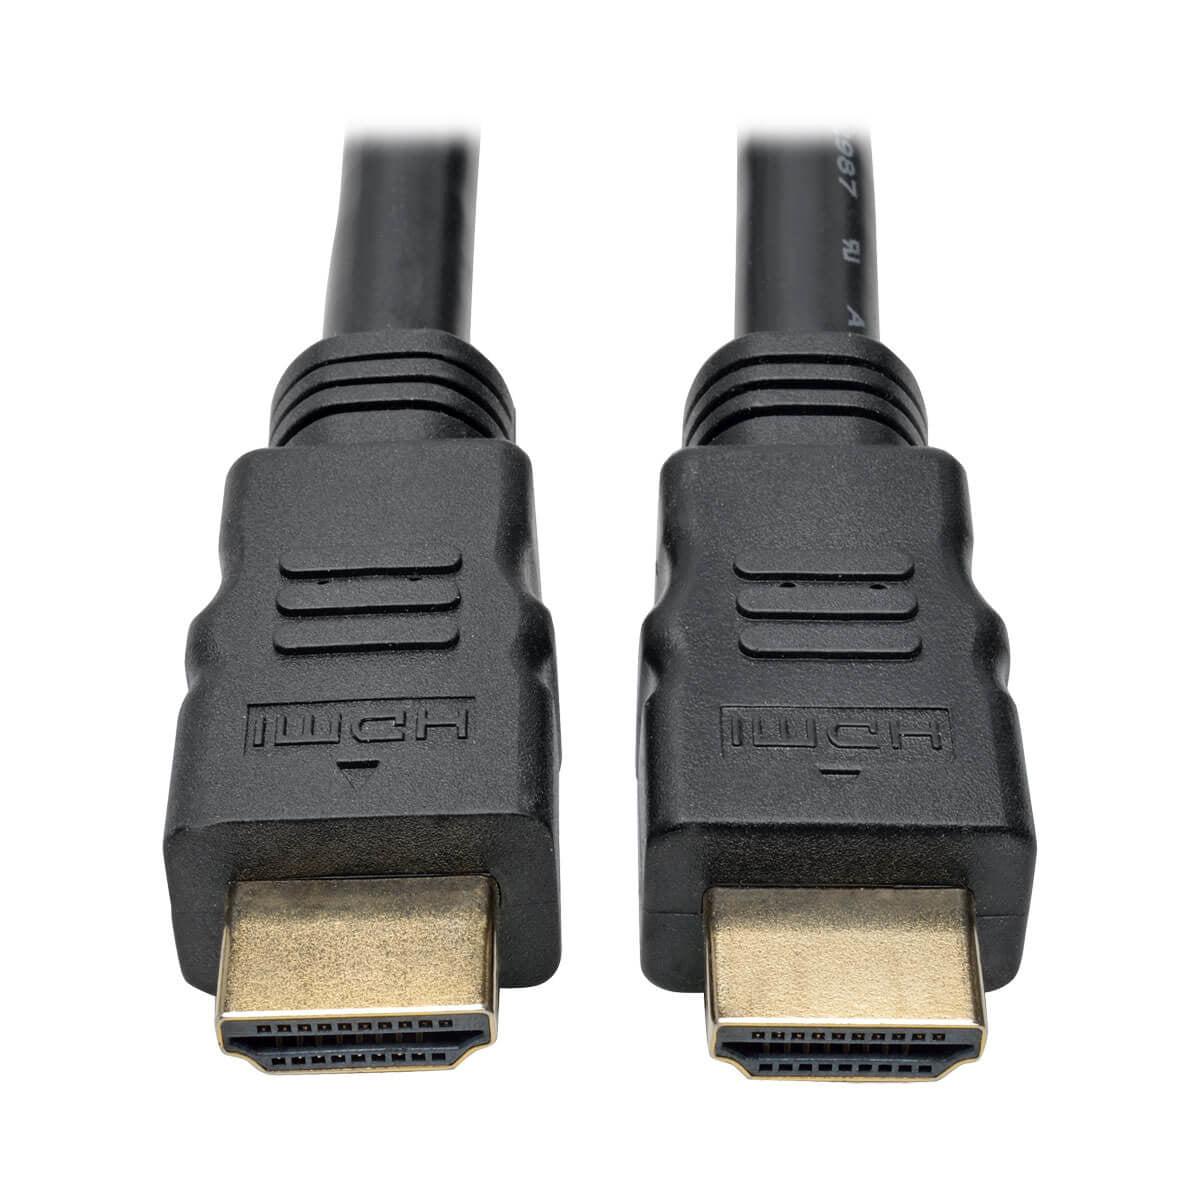 Tripp Lite P568-100-Act Active High-Speed Hdmi Cable With Built-In Signal Booster (M/M), Black, 100 Ft. (30 M)